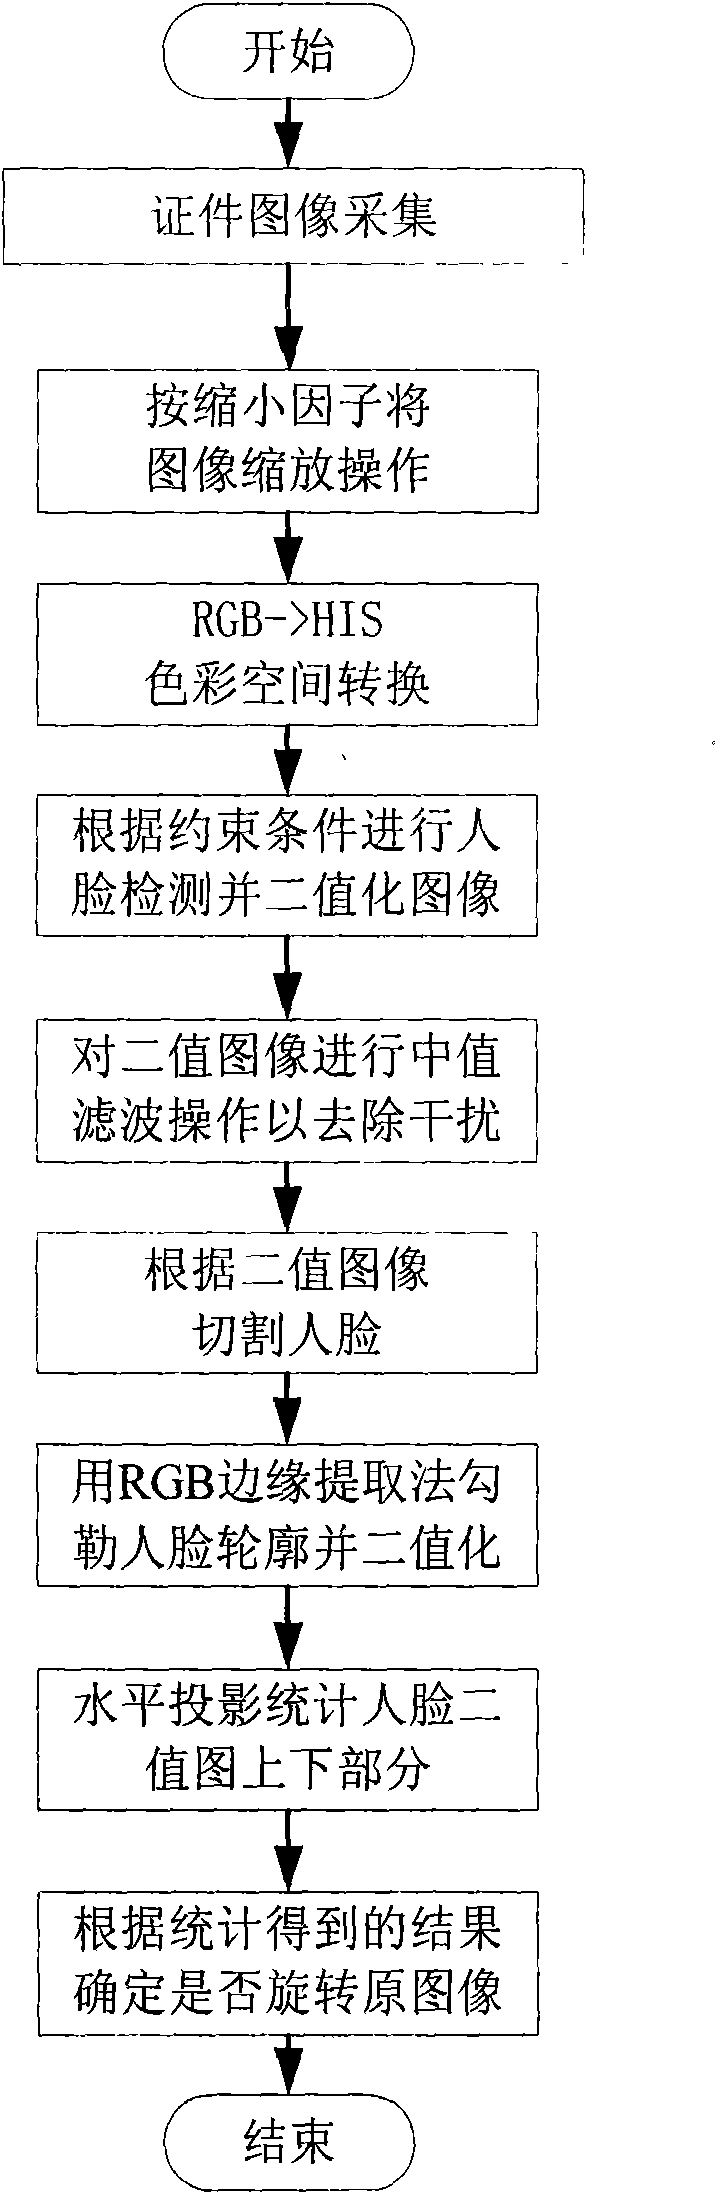 Method for detecting and adjusting inversion of certificate image